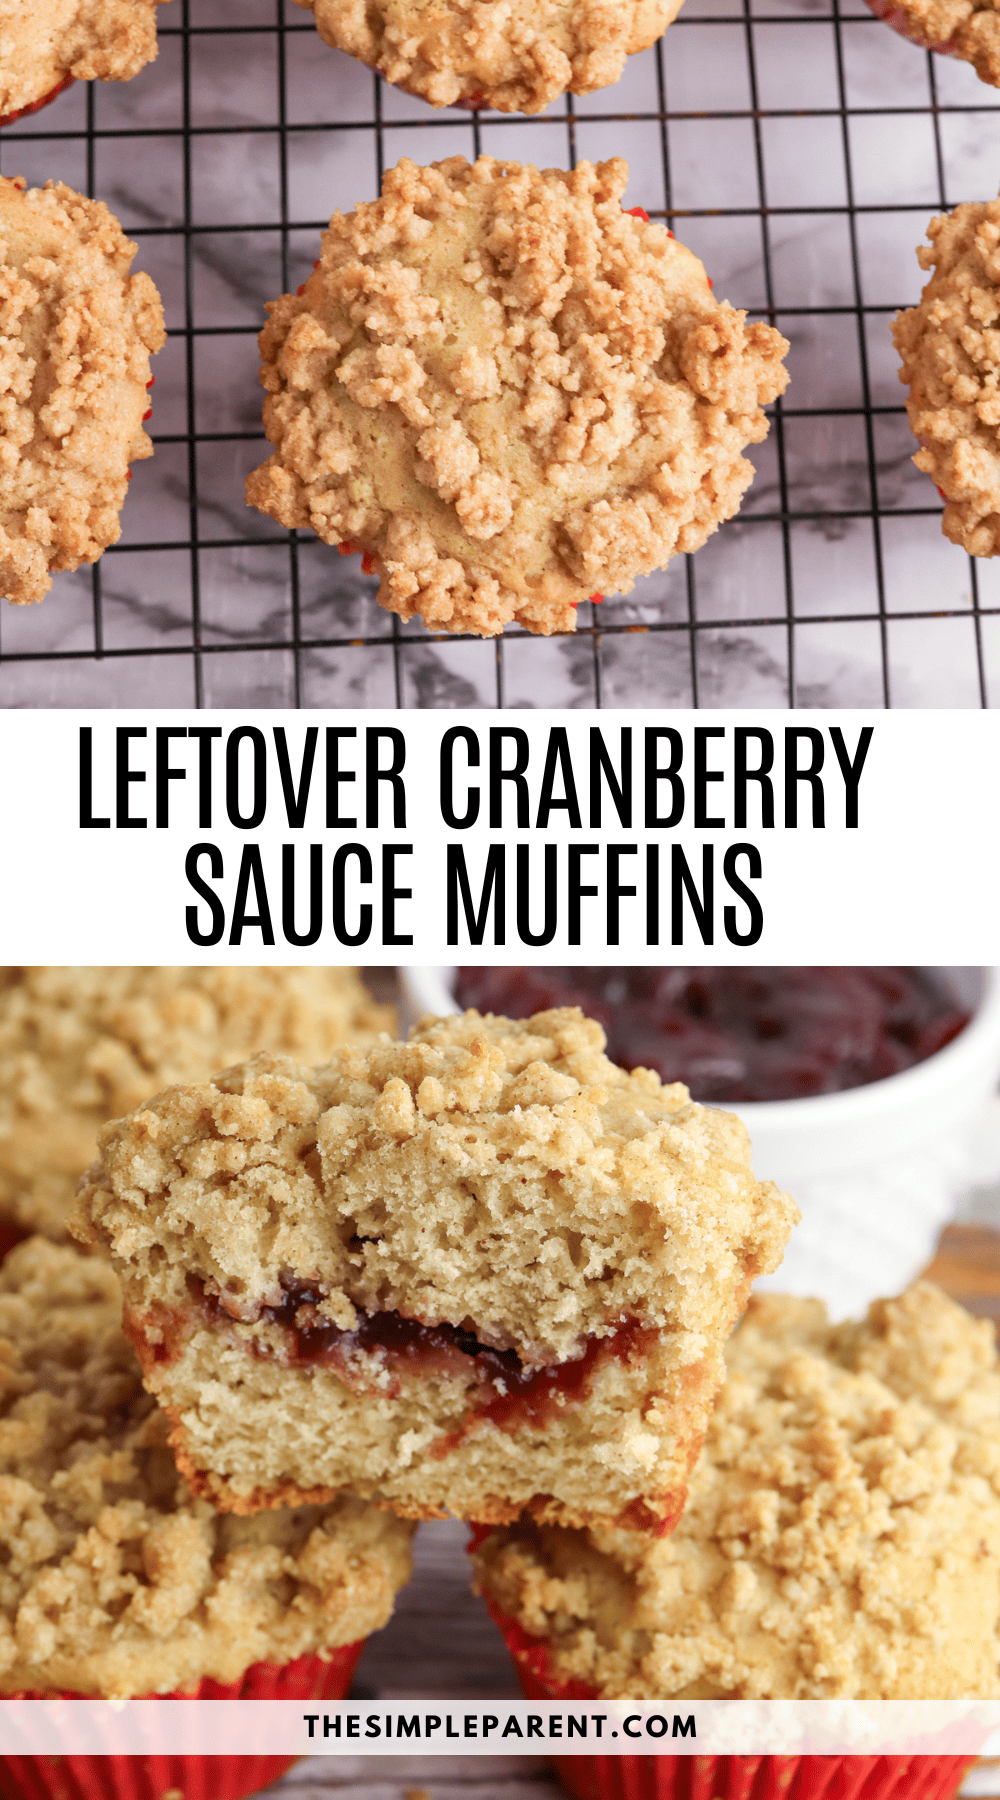 Leftover Cranberry Sauce Muffins